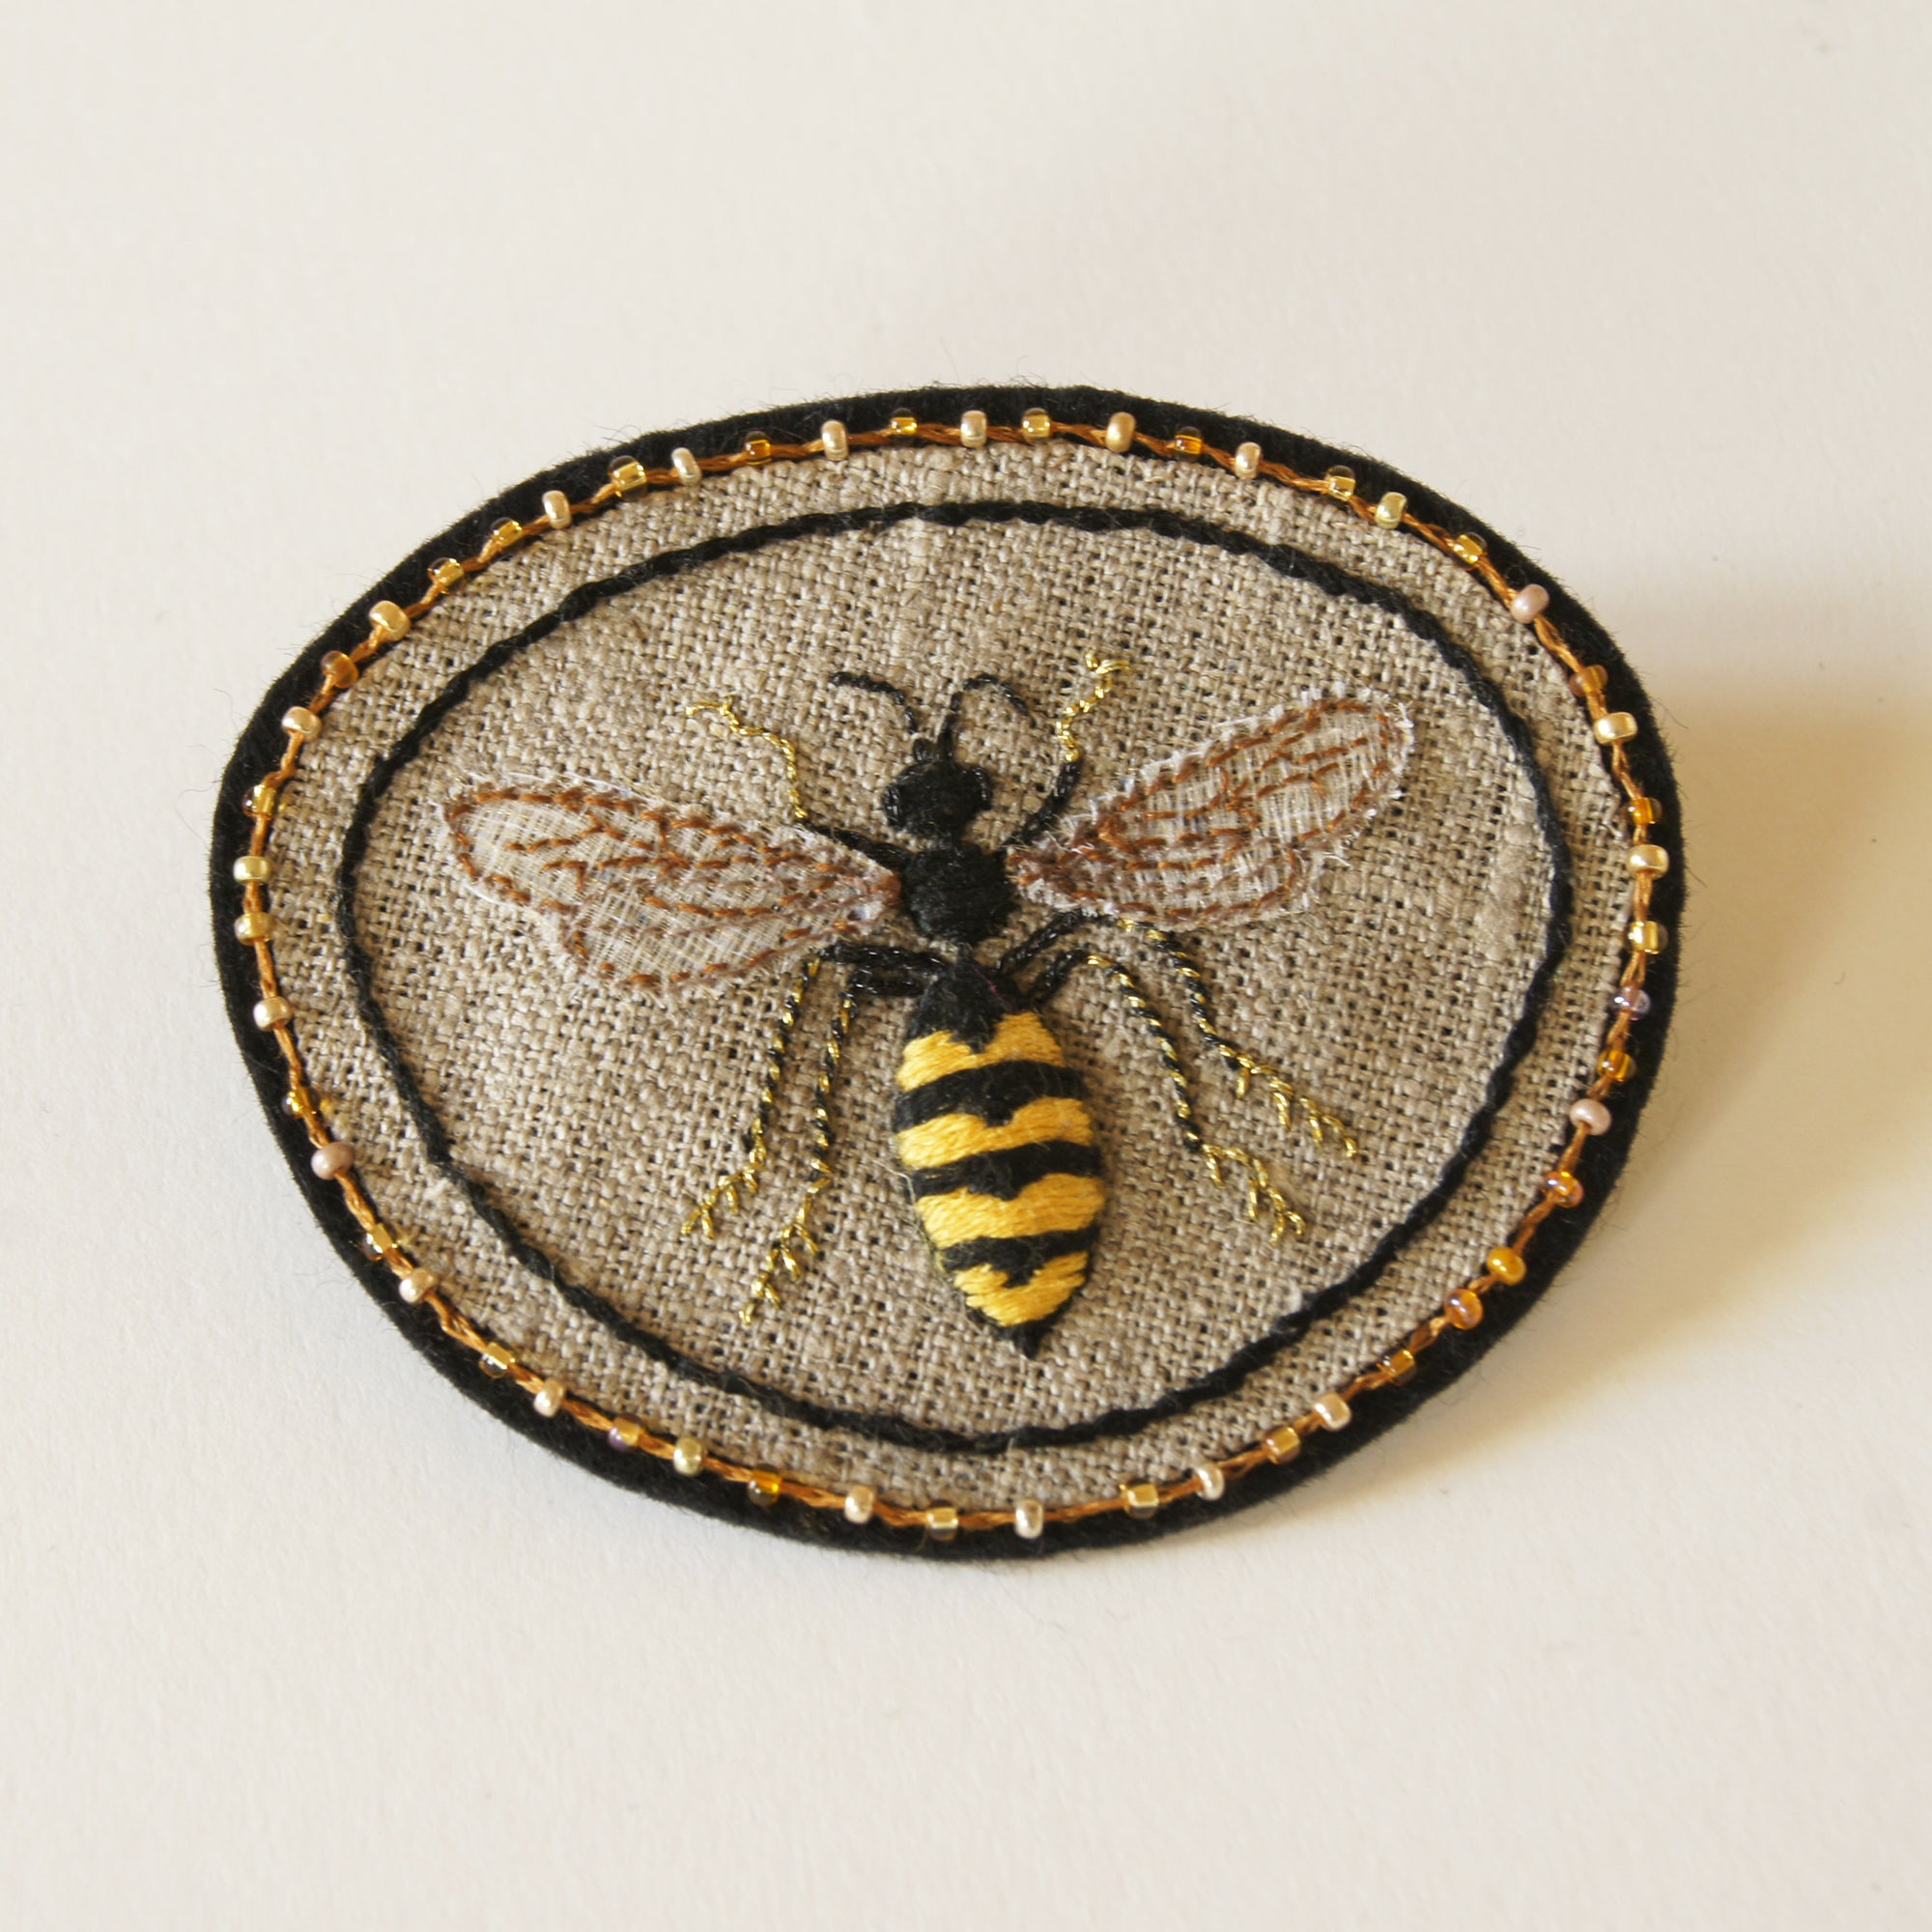 Common Wasp Hand Embroidered Sew-on Patch